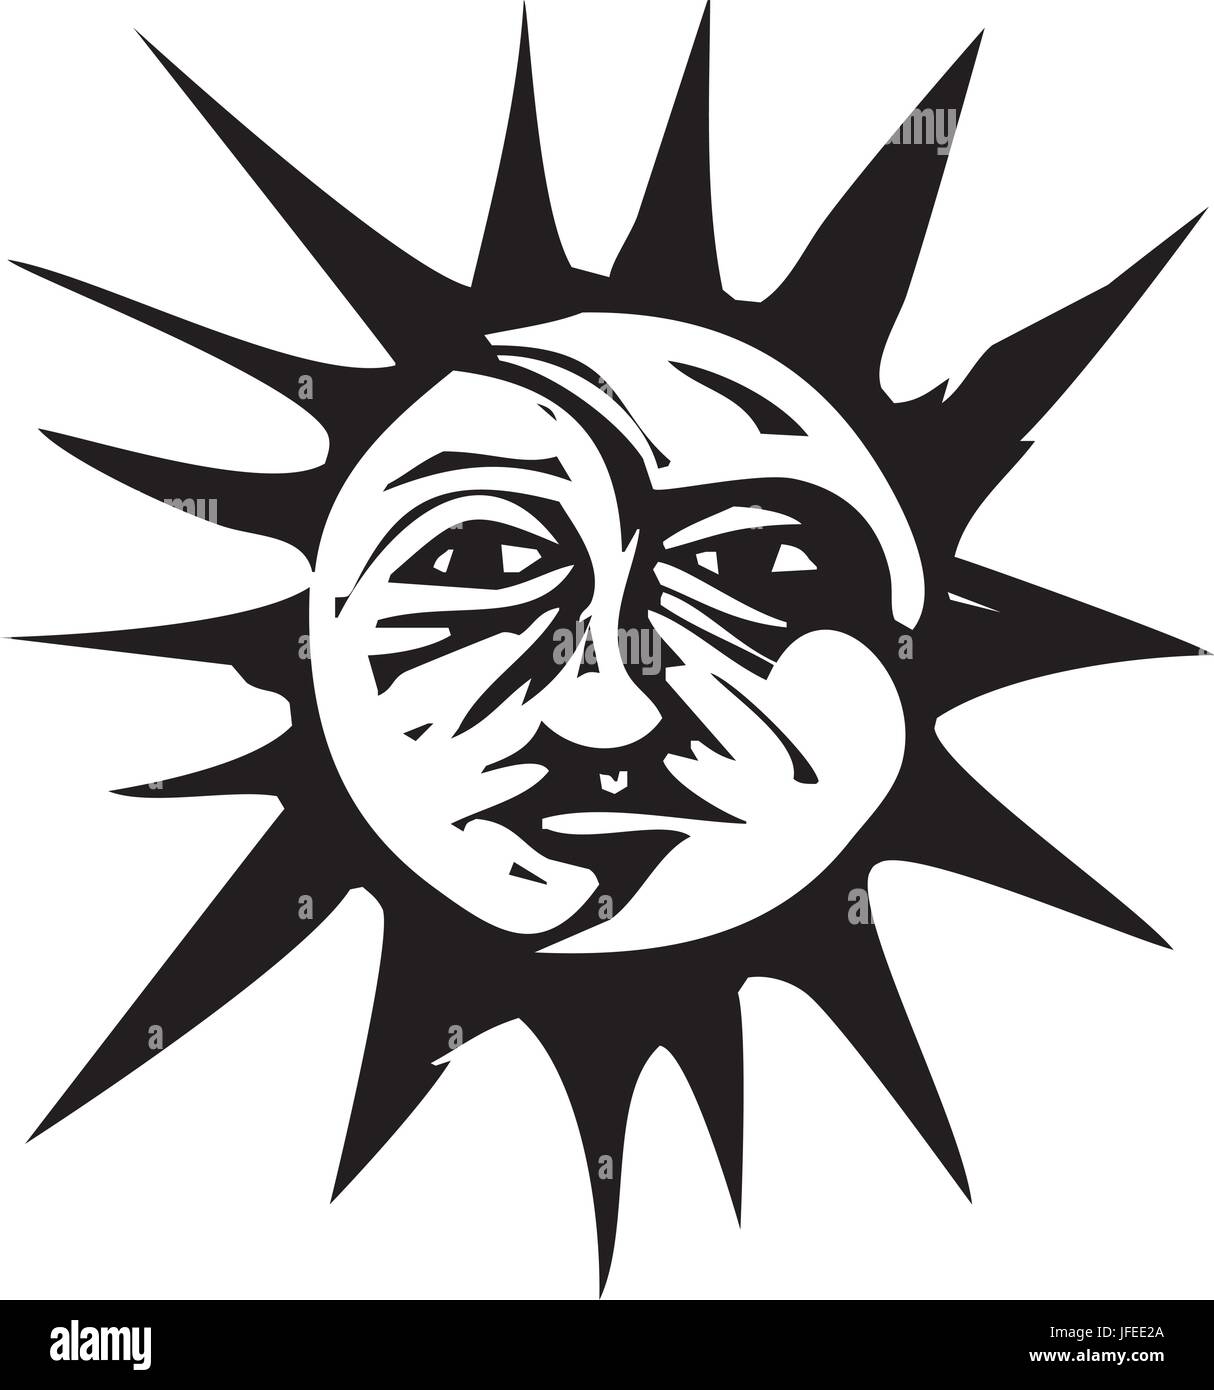 Woodcut style image of a sun and moon face Stock Vector